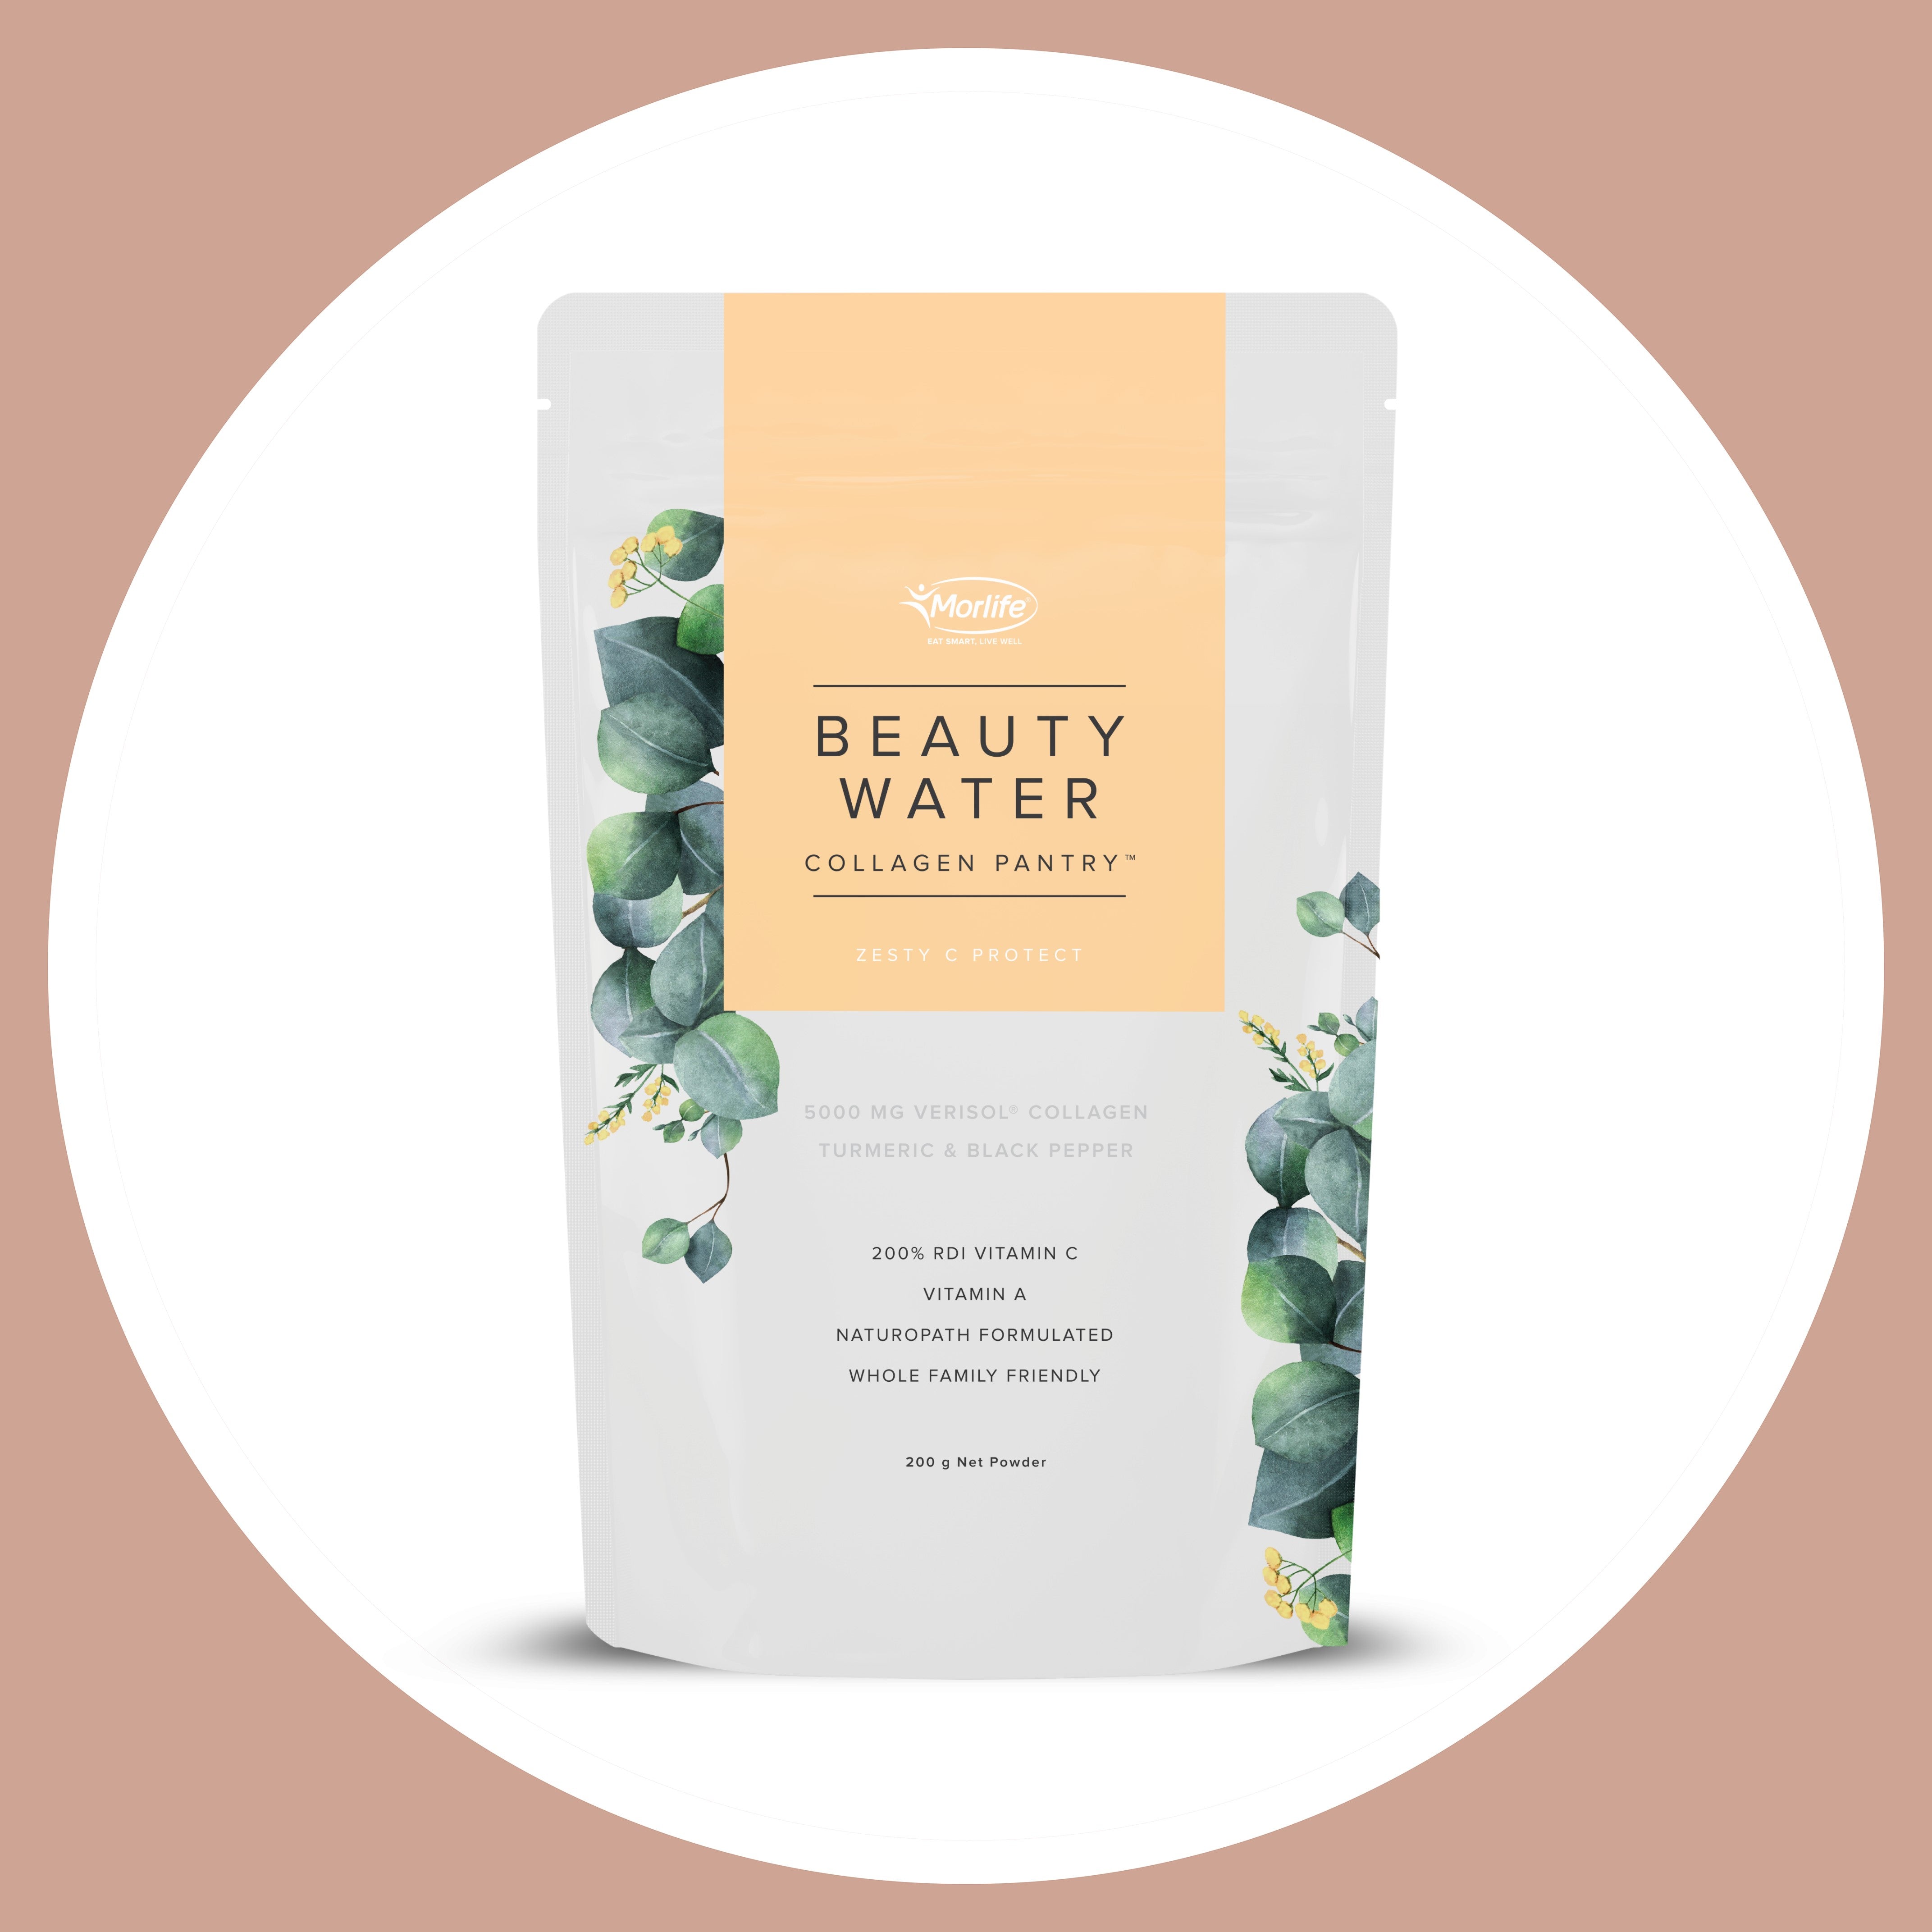 Beauty Water – Zesty C Protect